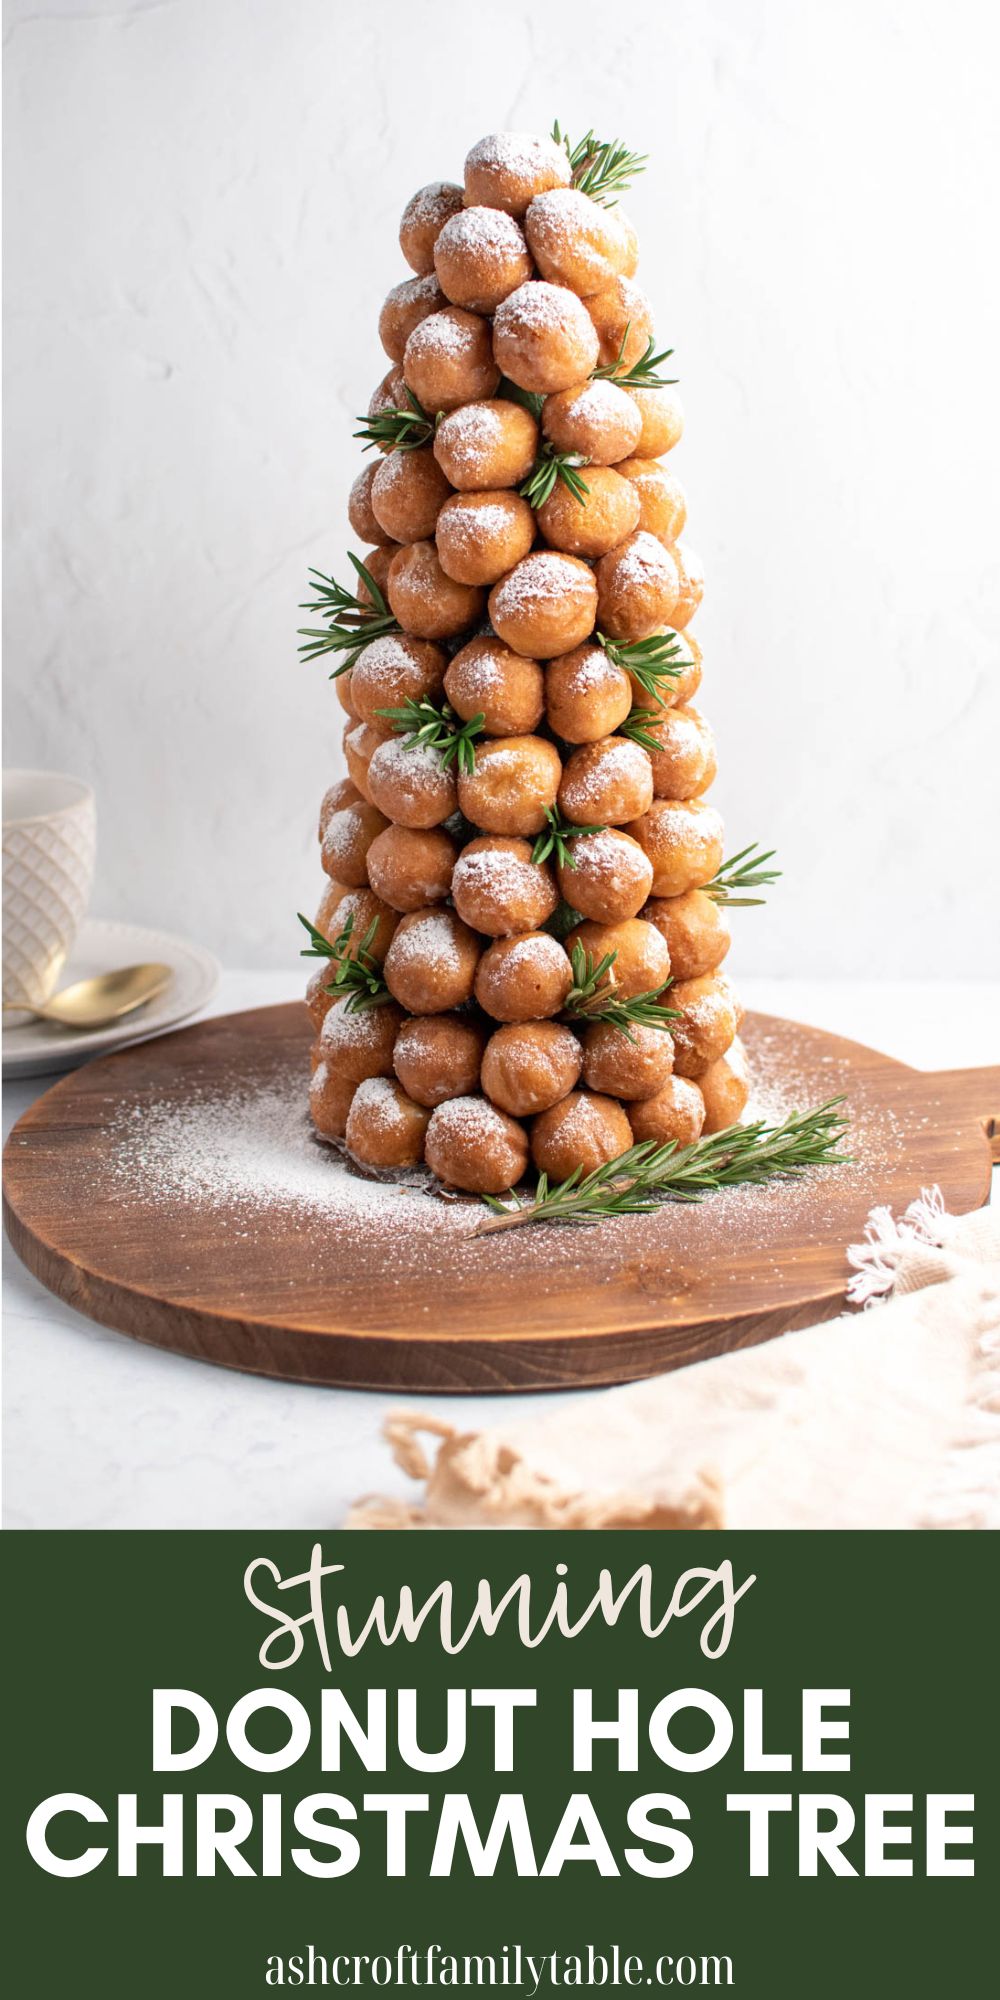 Pinterest graphic with text and photo of donut hole Christmas tree with fresh rosemary.